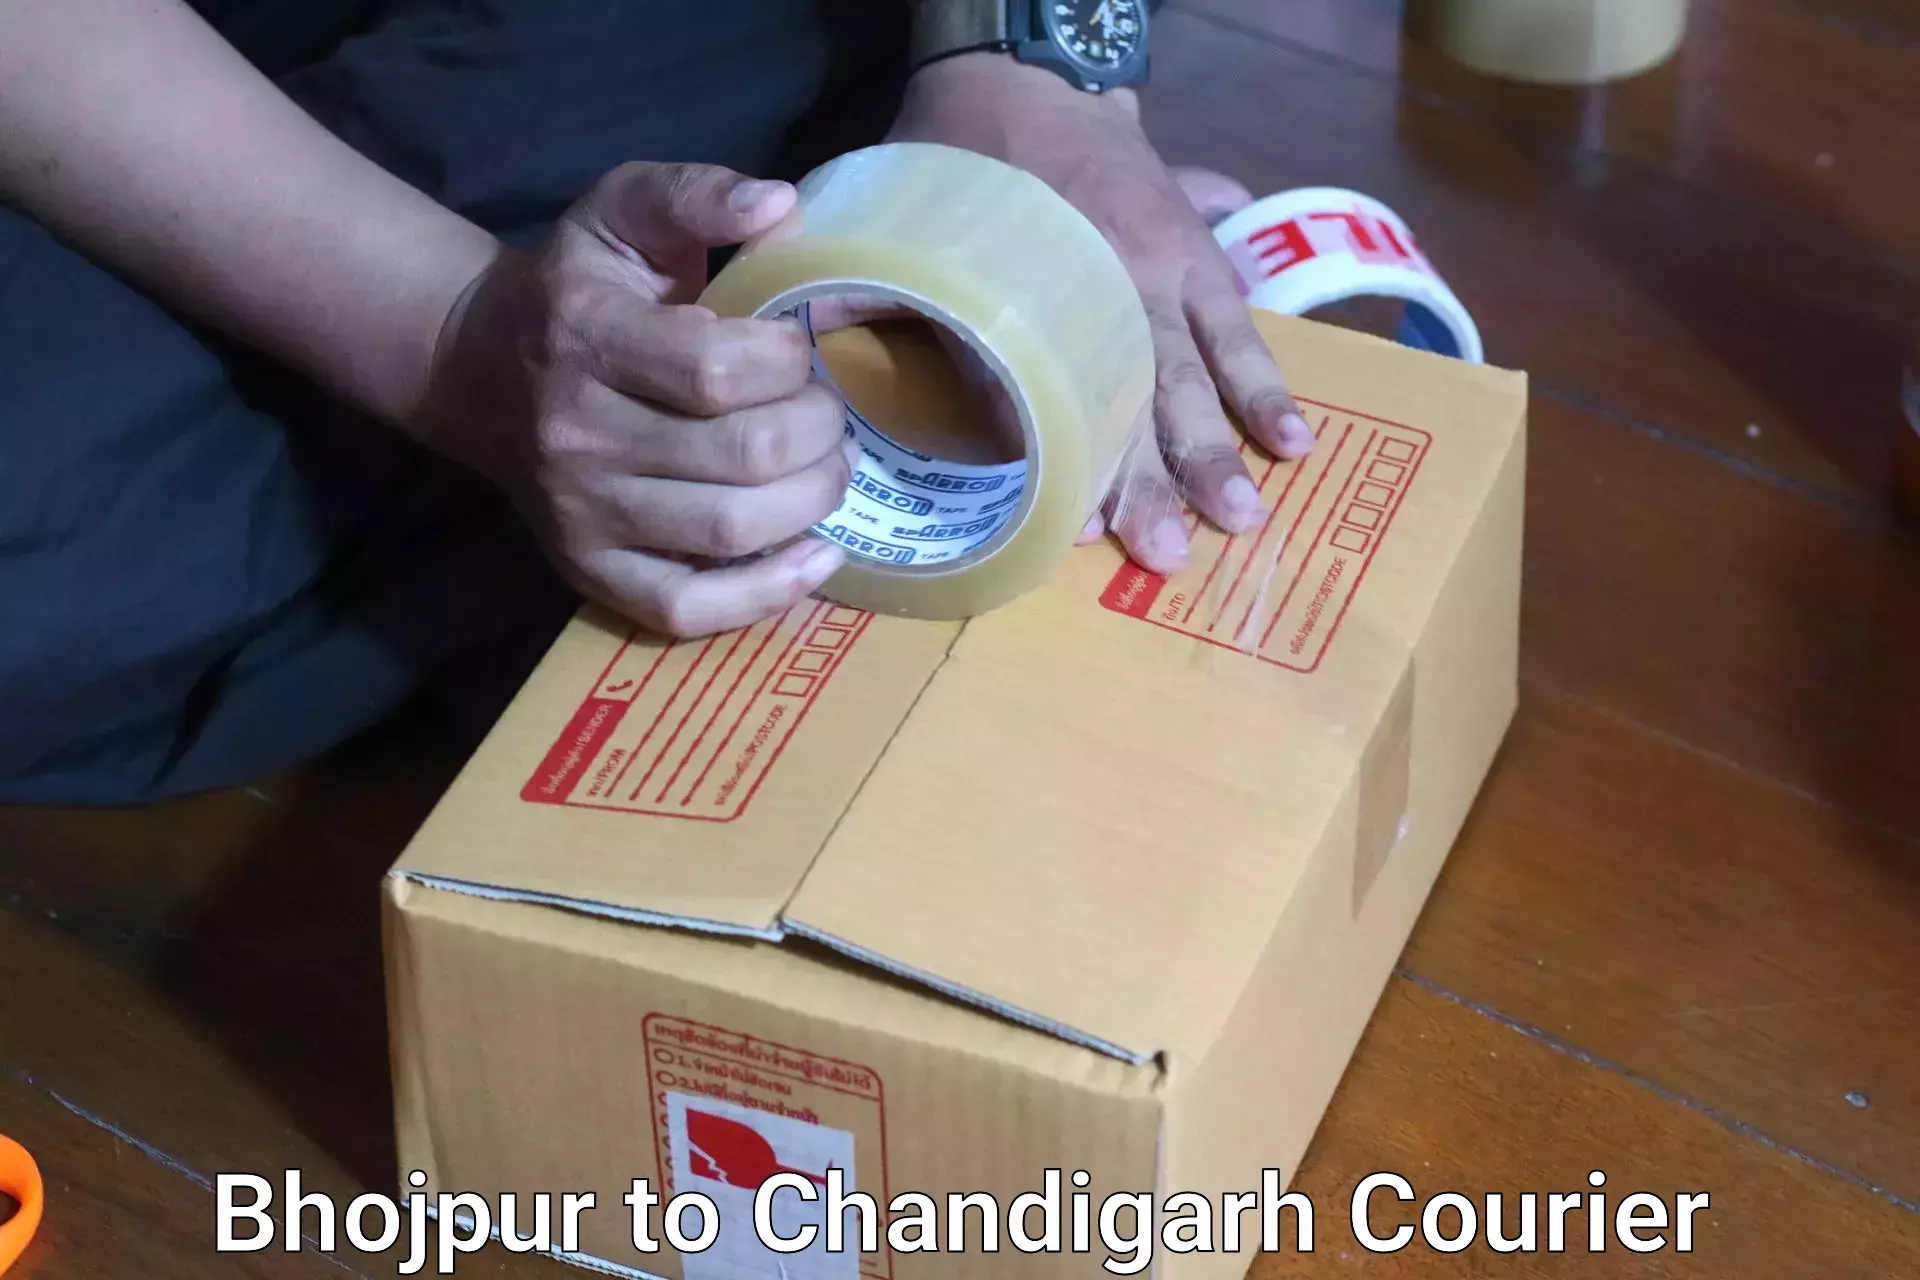 Personal effects shipping Bhojpur to Chandigarh